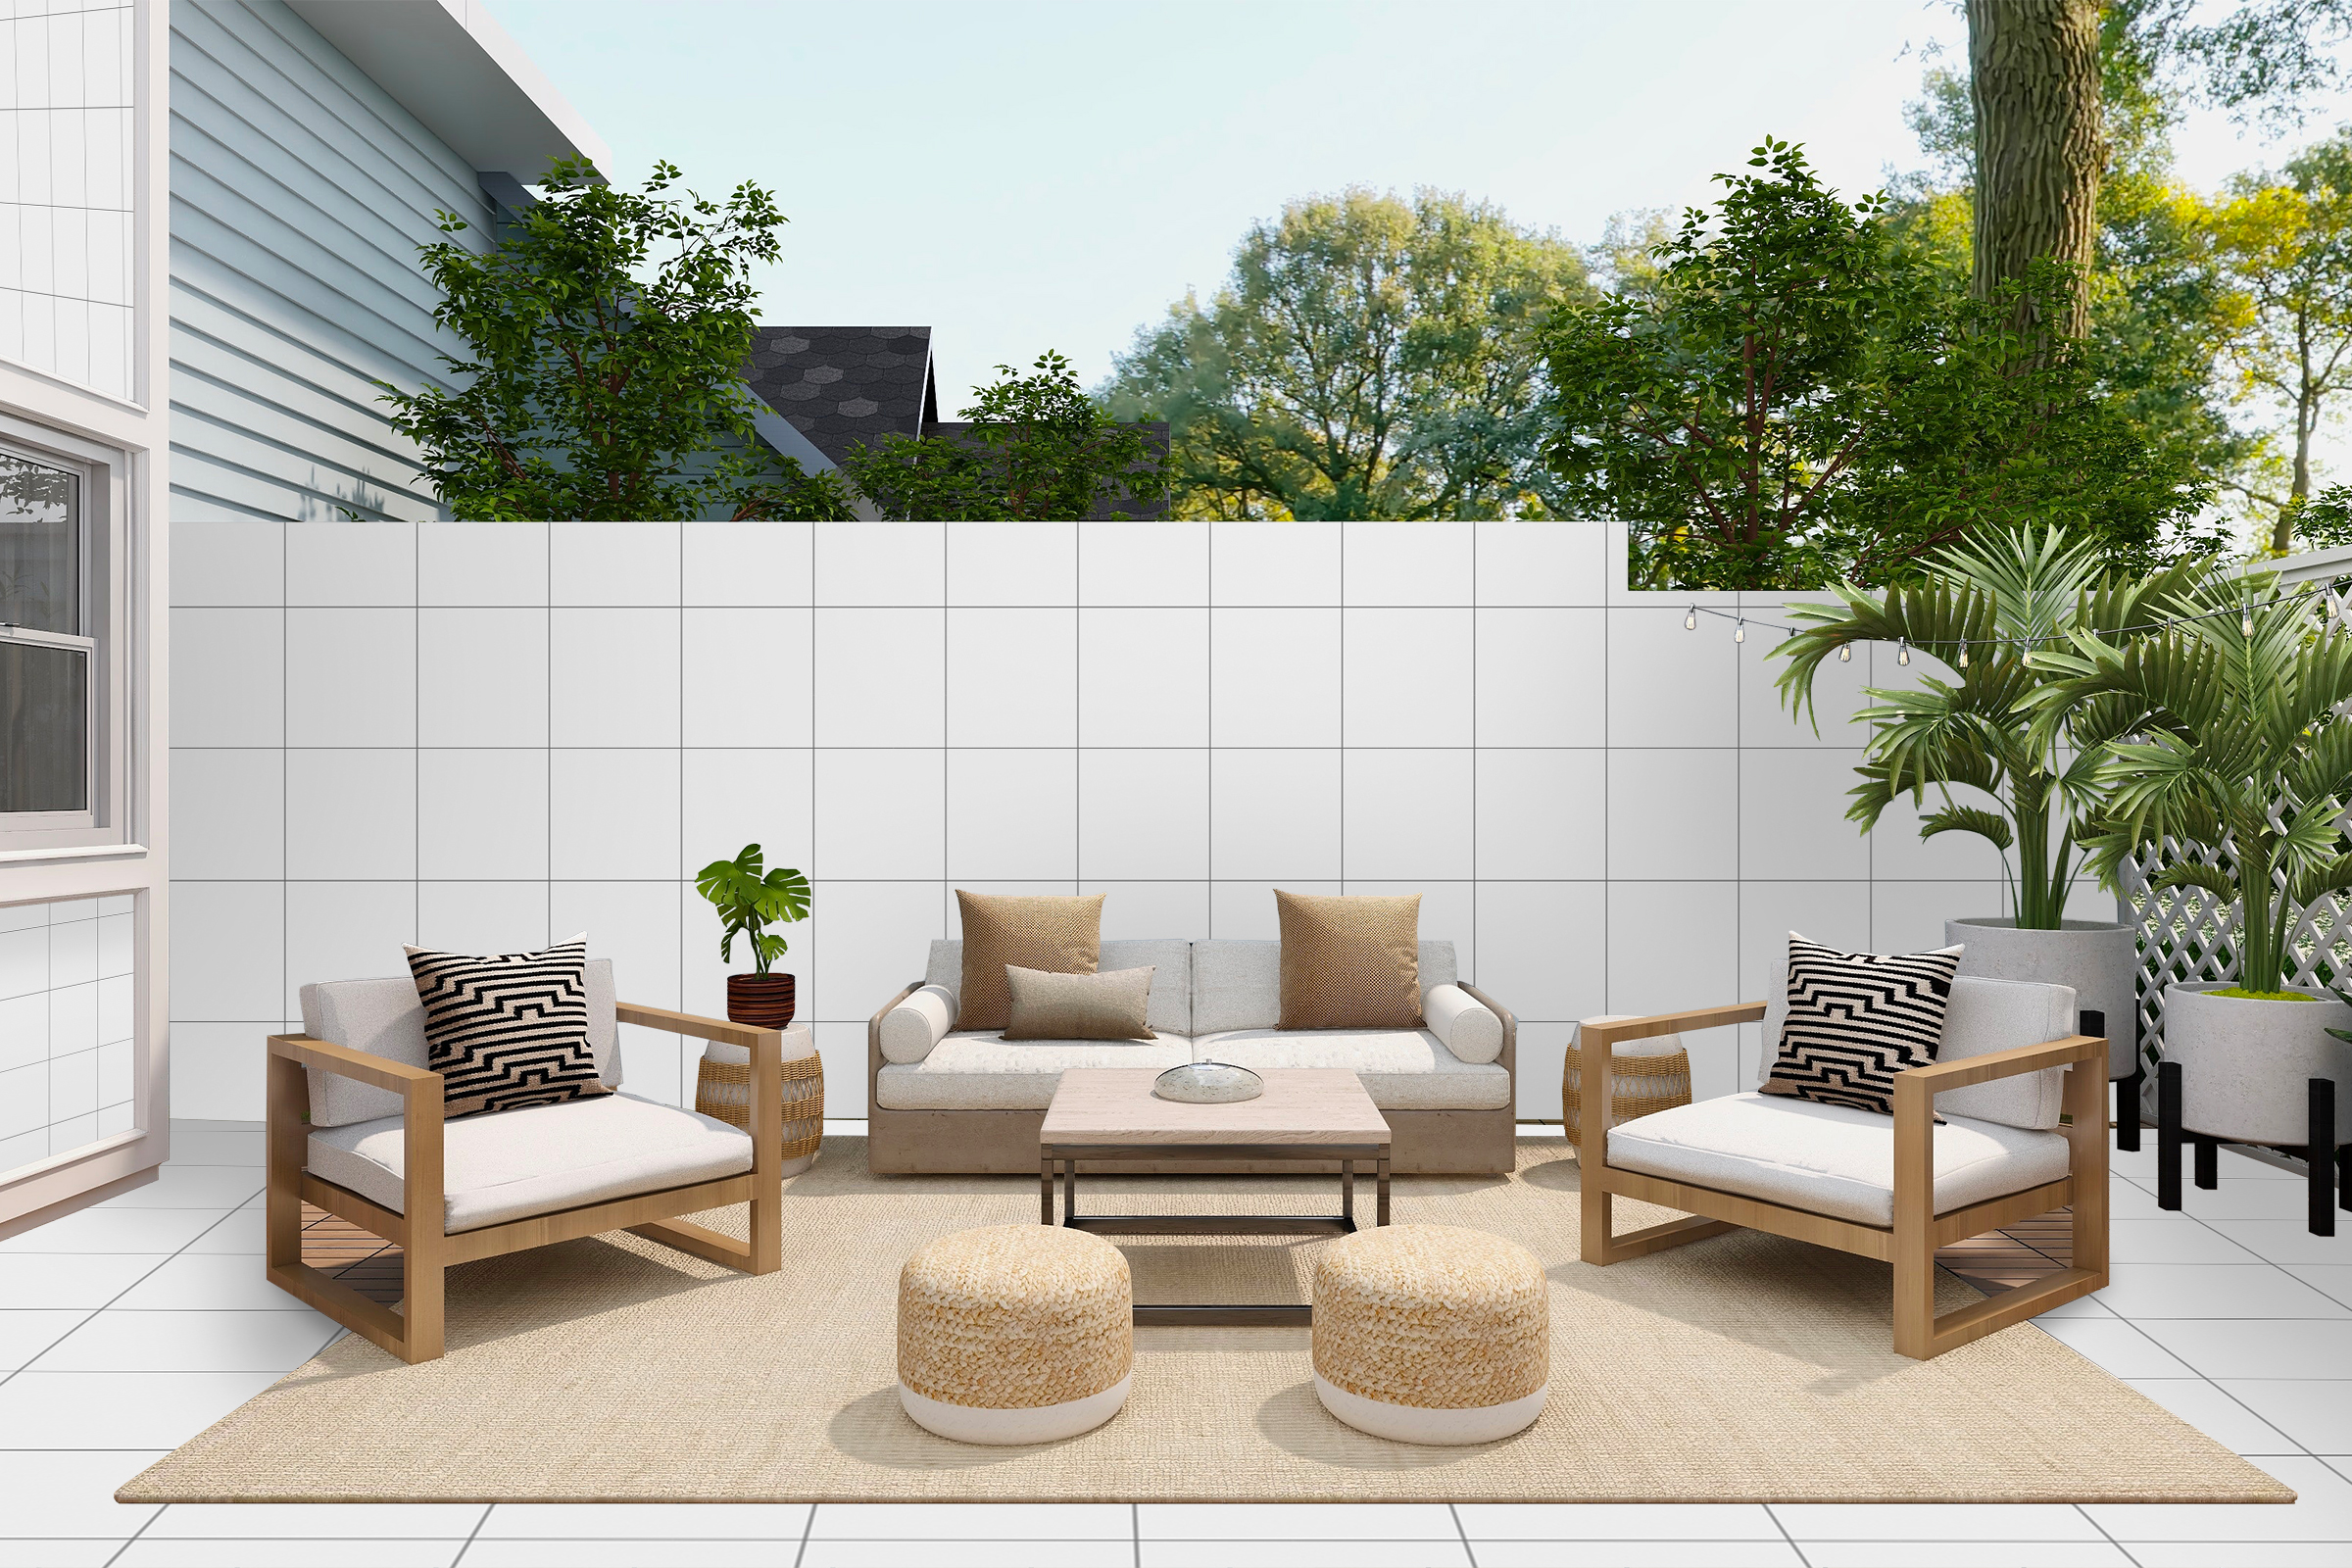 Make your design project concrete: choose the colors of our porcelain stoneware slabs that are perfect for the outdoor area you most desire